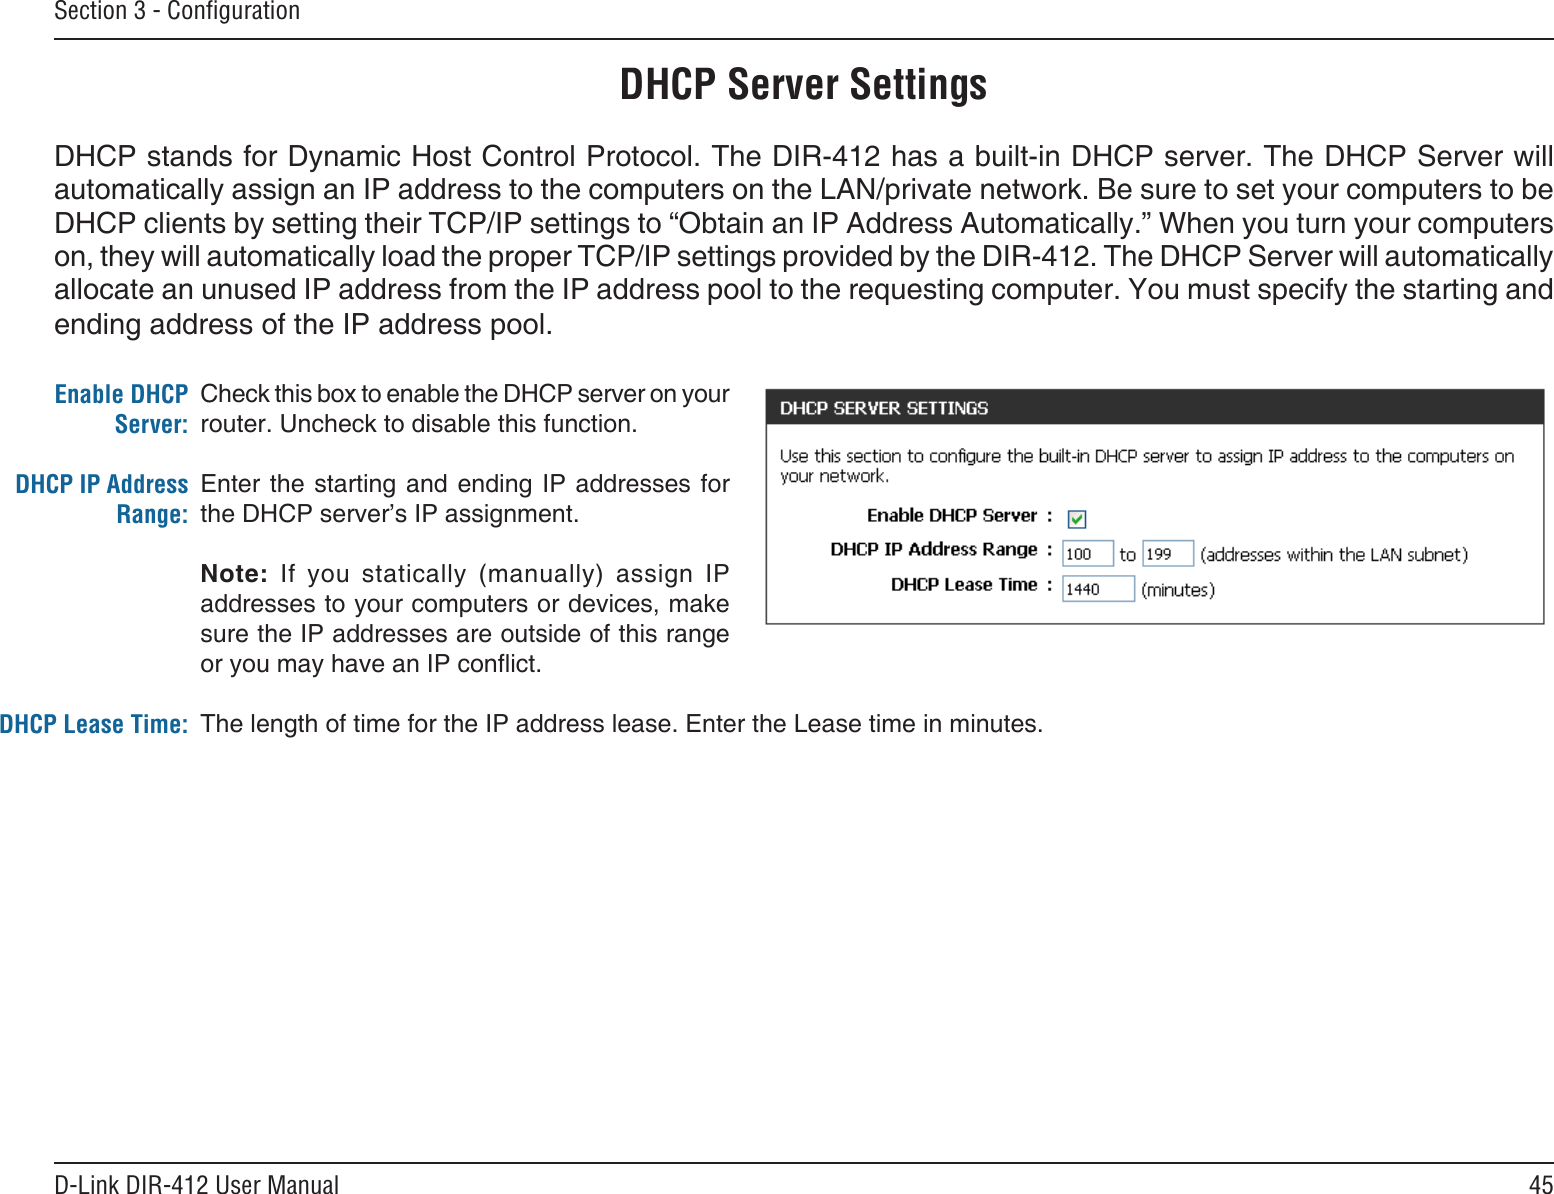 45D-Link DIR-412 User ManualSection 3 - ConﬁgurationCheck this box to enable the DHCP server on your router. Uncheck to disable this function.Enter the starting and ending IP addresses for the DHCP server’s IP assignment.Note:  If  you  statically  (manually)  assign  IP addresses to your computers or devices, make sure the IP addresses are outside of this range or you may have an IP conict. The length of time for the IP address lease. Enter the Lease time in minutes.Enable DHCP Server:DHCP IP Address Range:DHCP Lease Time:DHCP Server SettingsDHCP stands for Dynamic Host Control Protocol. The DIR-412 has a built-in DHCP server. The DHCP Server will automatically assign an IP address to the computers on the LAN/private network. Be sure to set your computers to be DHCP clients by setting their TCP/IP settings to “Obtain an IP Address Automatically.” When you turn your computers on, they will automatically load the proper TCP/IP settings provided by the DIR-412. The DHCP Server will automatically allocate an unused IP address from the IP address pool to the requesting computer. You must specify the starting and ending address of the IP address pool.